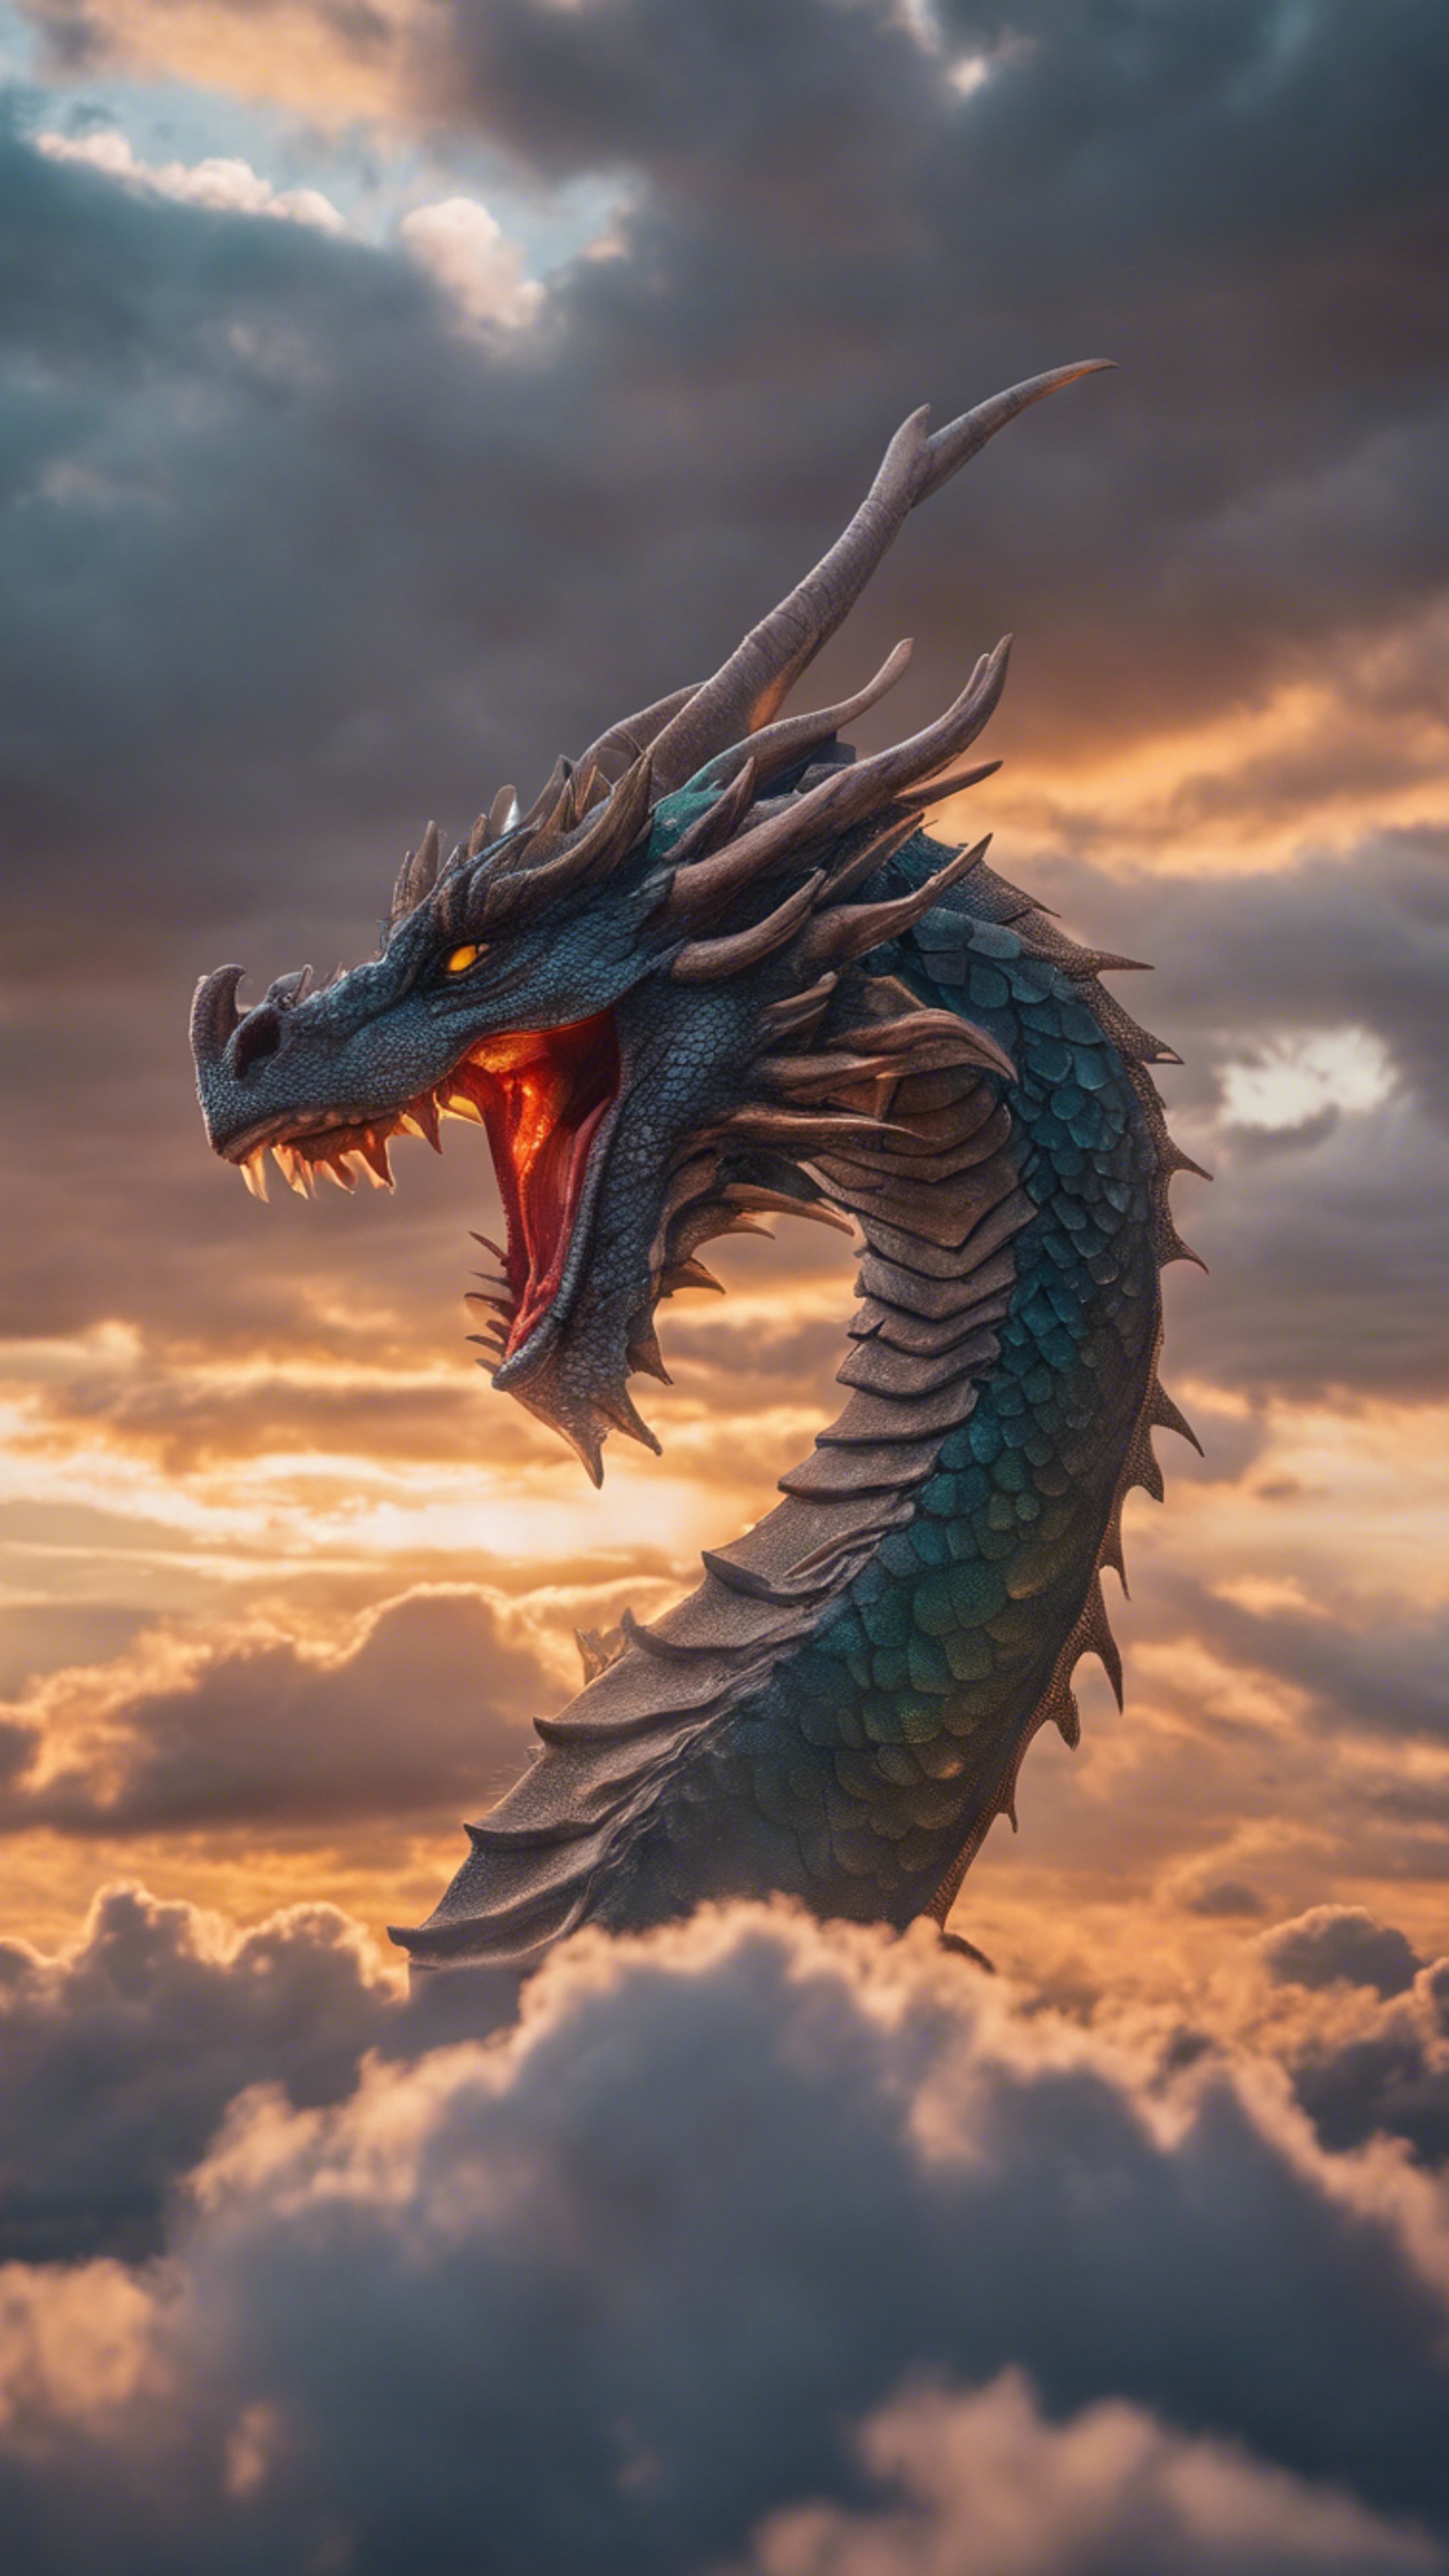 A dragon of pure light breaking through the clouds as the sun sets, its scales reflecting the vibrant colors of dusk. Тапет[43b0d43f7e0c44e88acd]